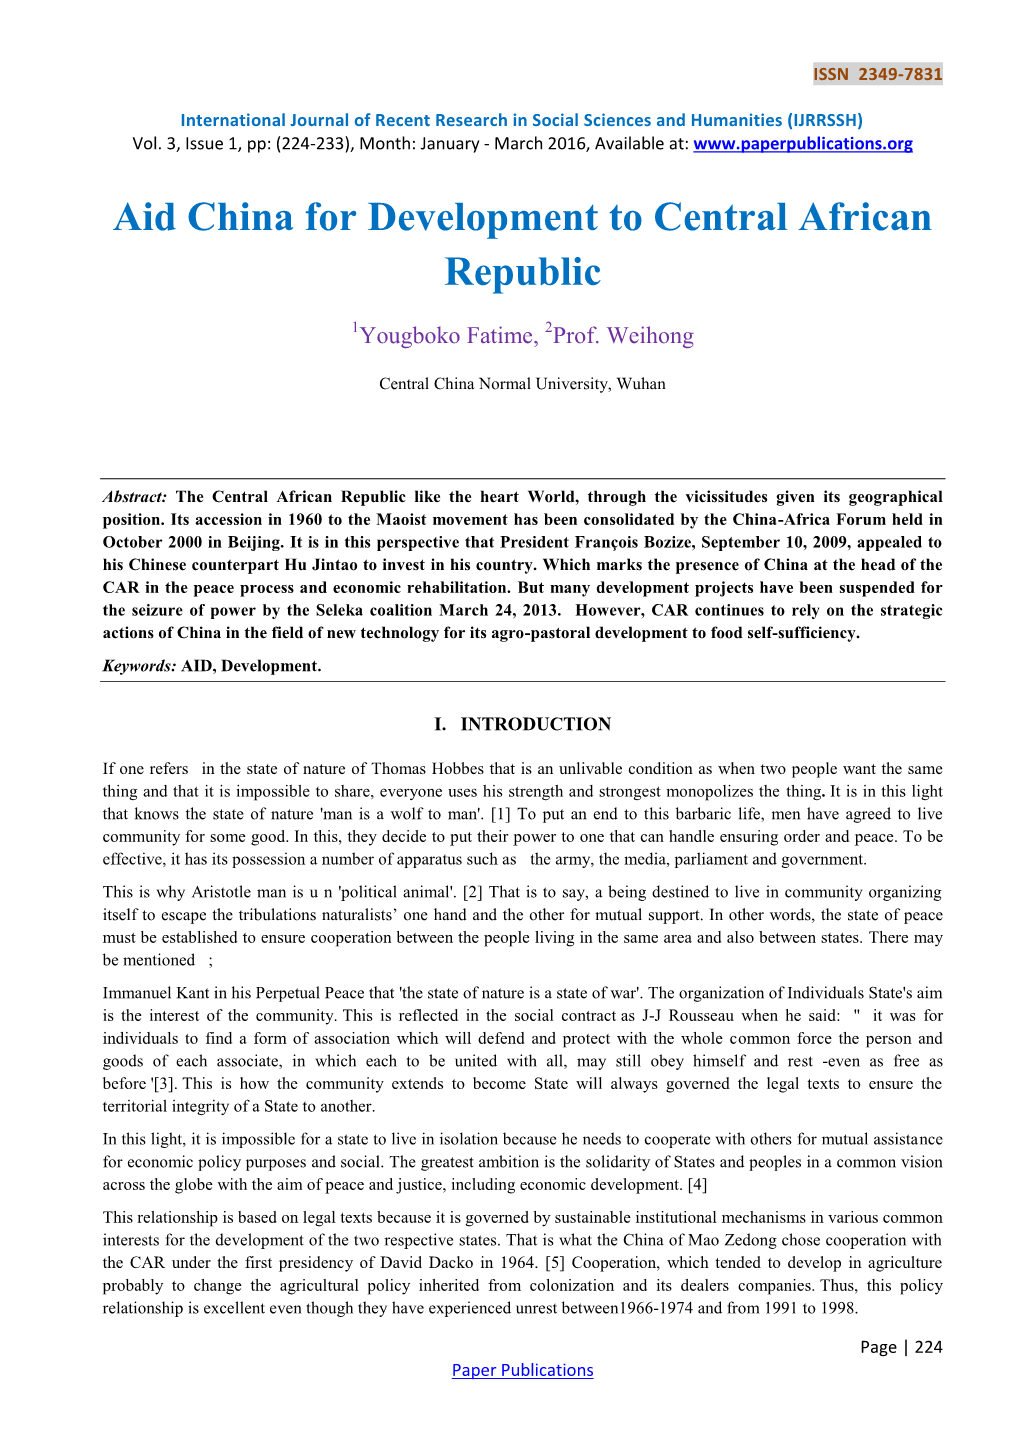 Aid China for Development to Central African Republic